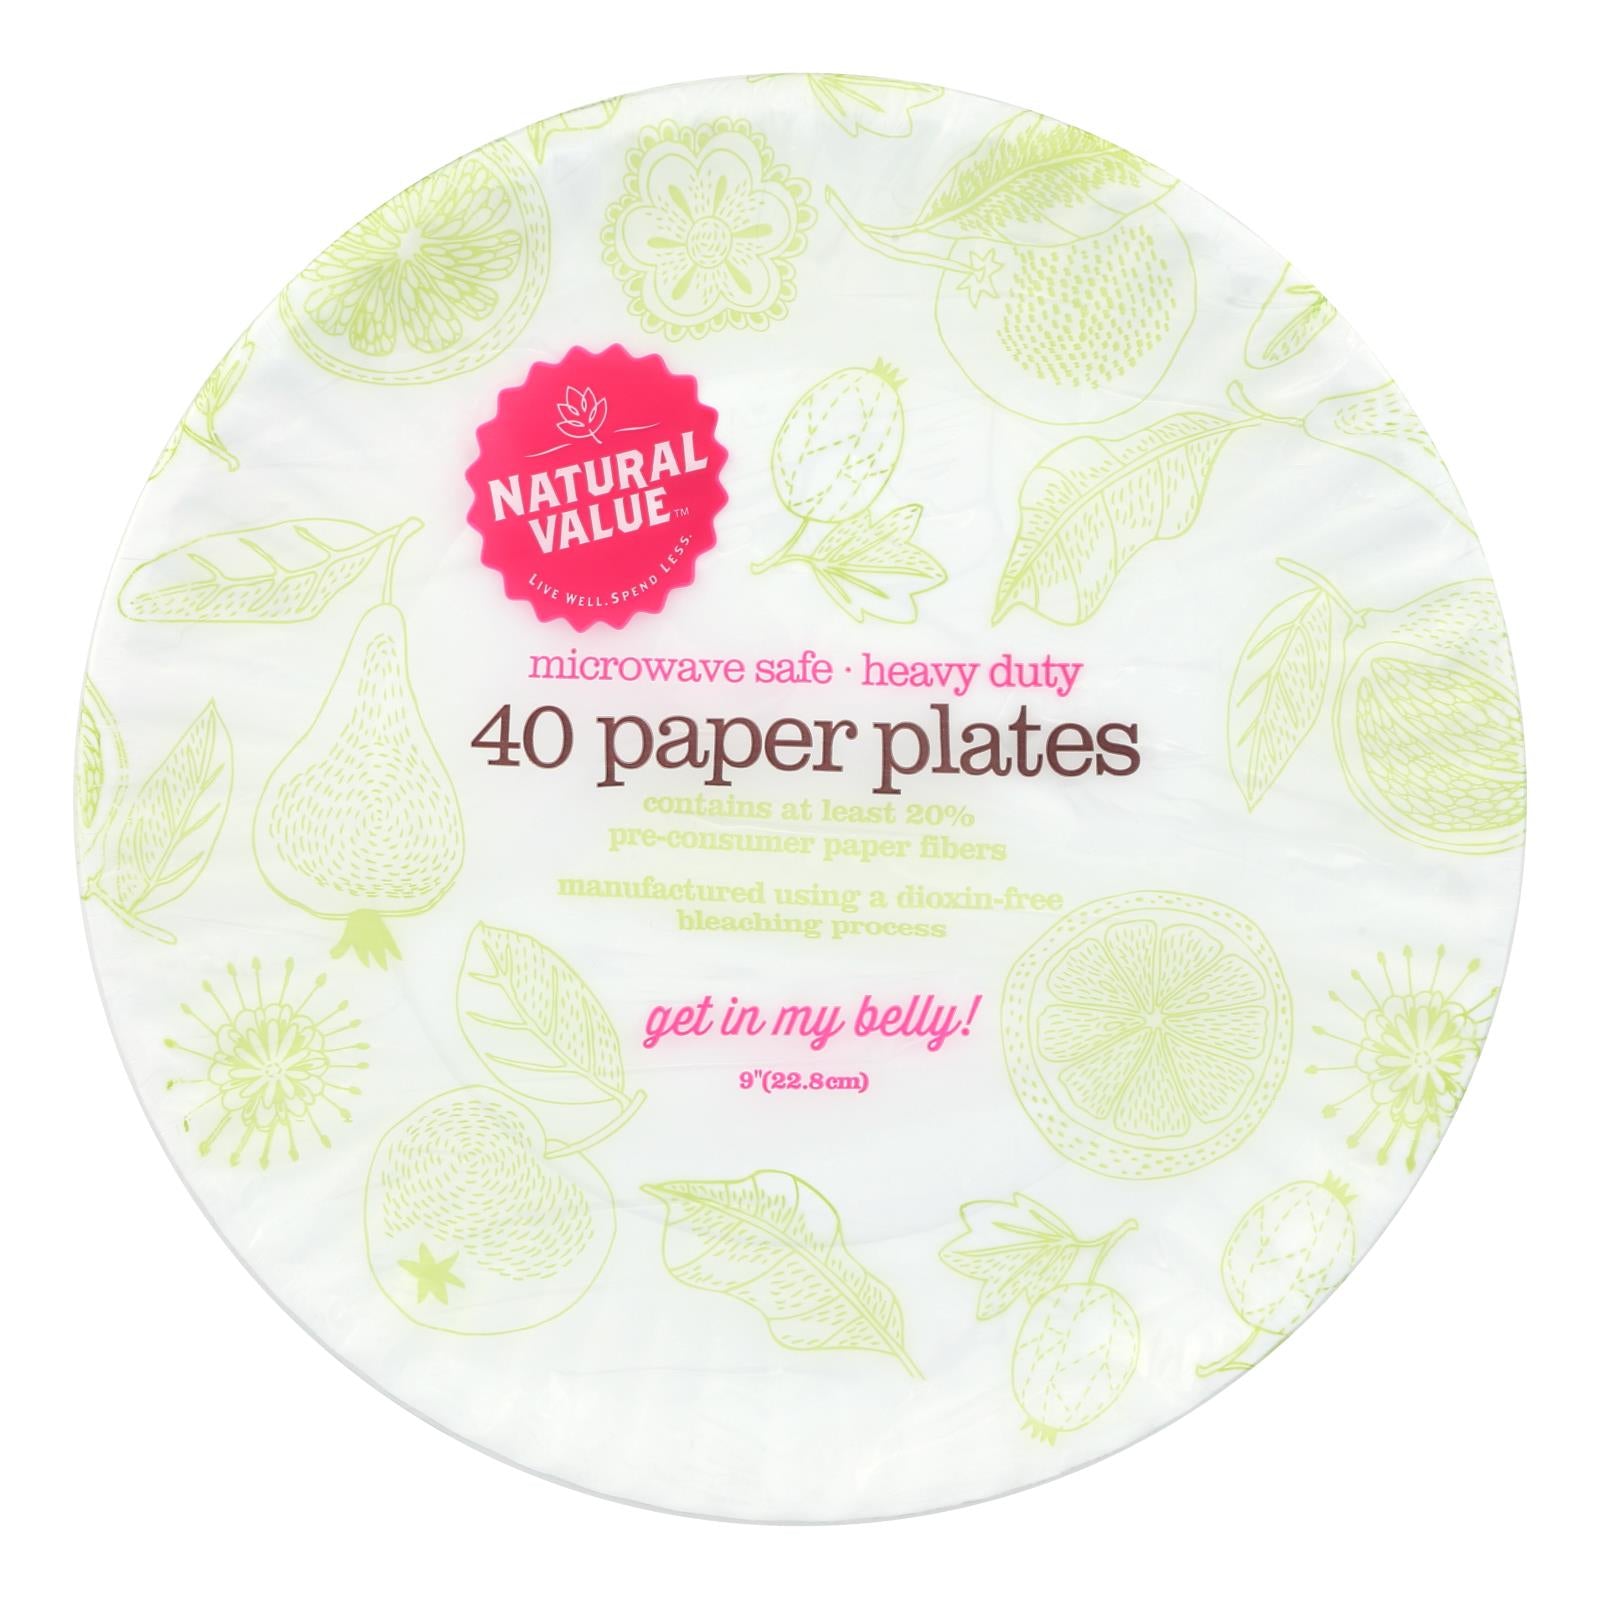 Natural Value - Paper Plates Recyc - Case of 24 - 40 CT